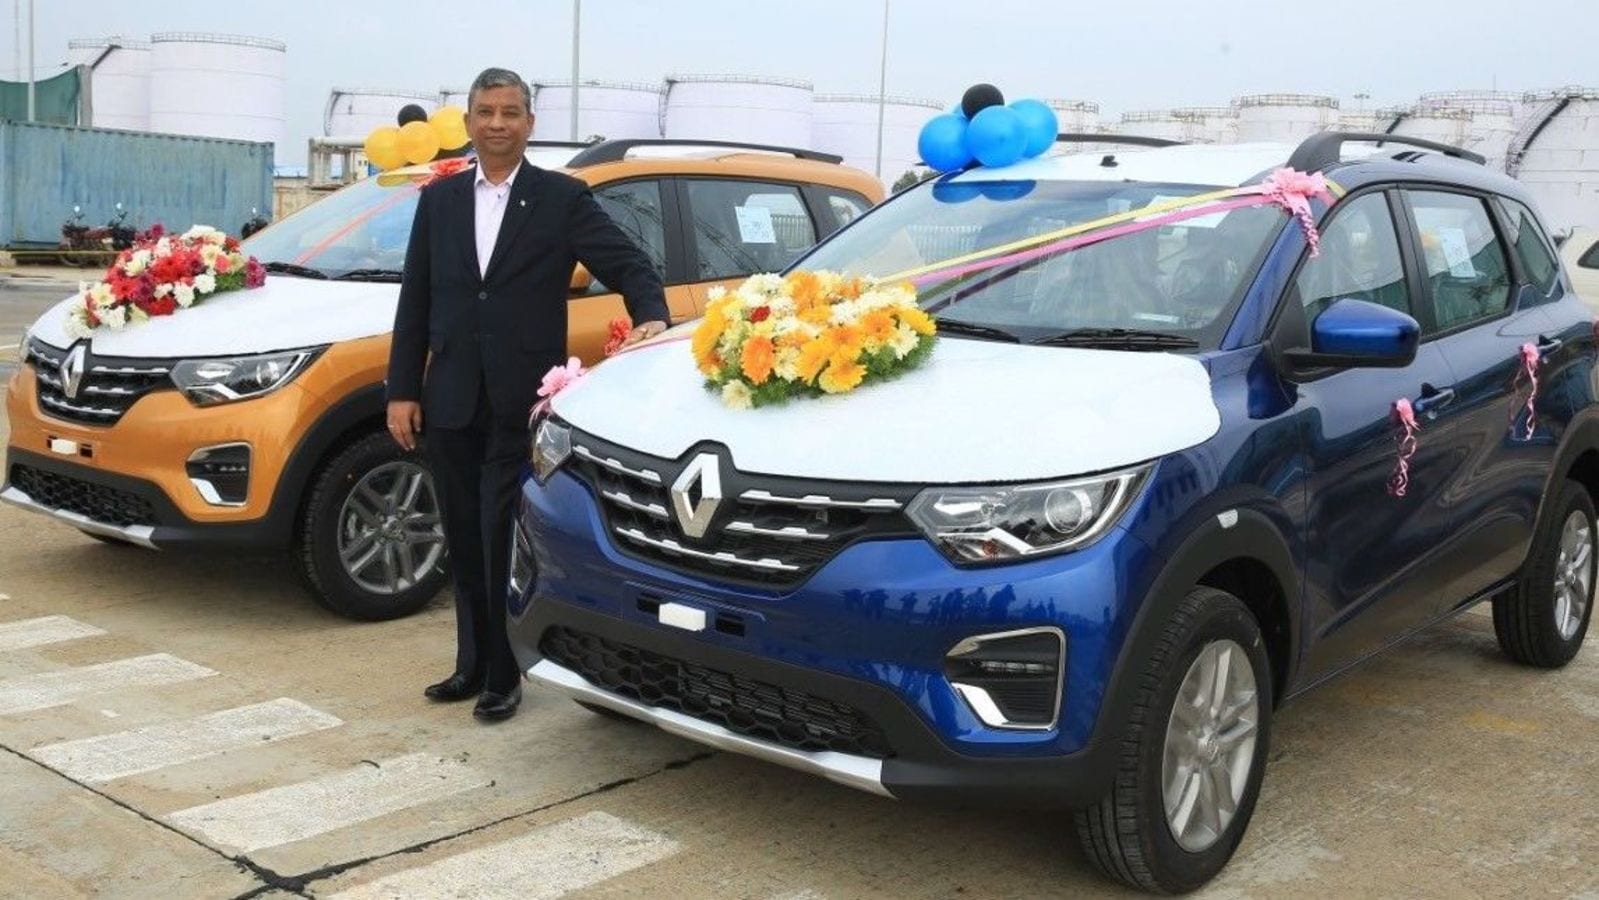 https://images.hindustantimes.com/auto/img/2020/02/18/1600x900/Venkatram_Mamillapalle,_Country_CEO_&_Managing_Director,_Renault_India_Operations_1581998063122.jpg